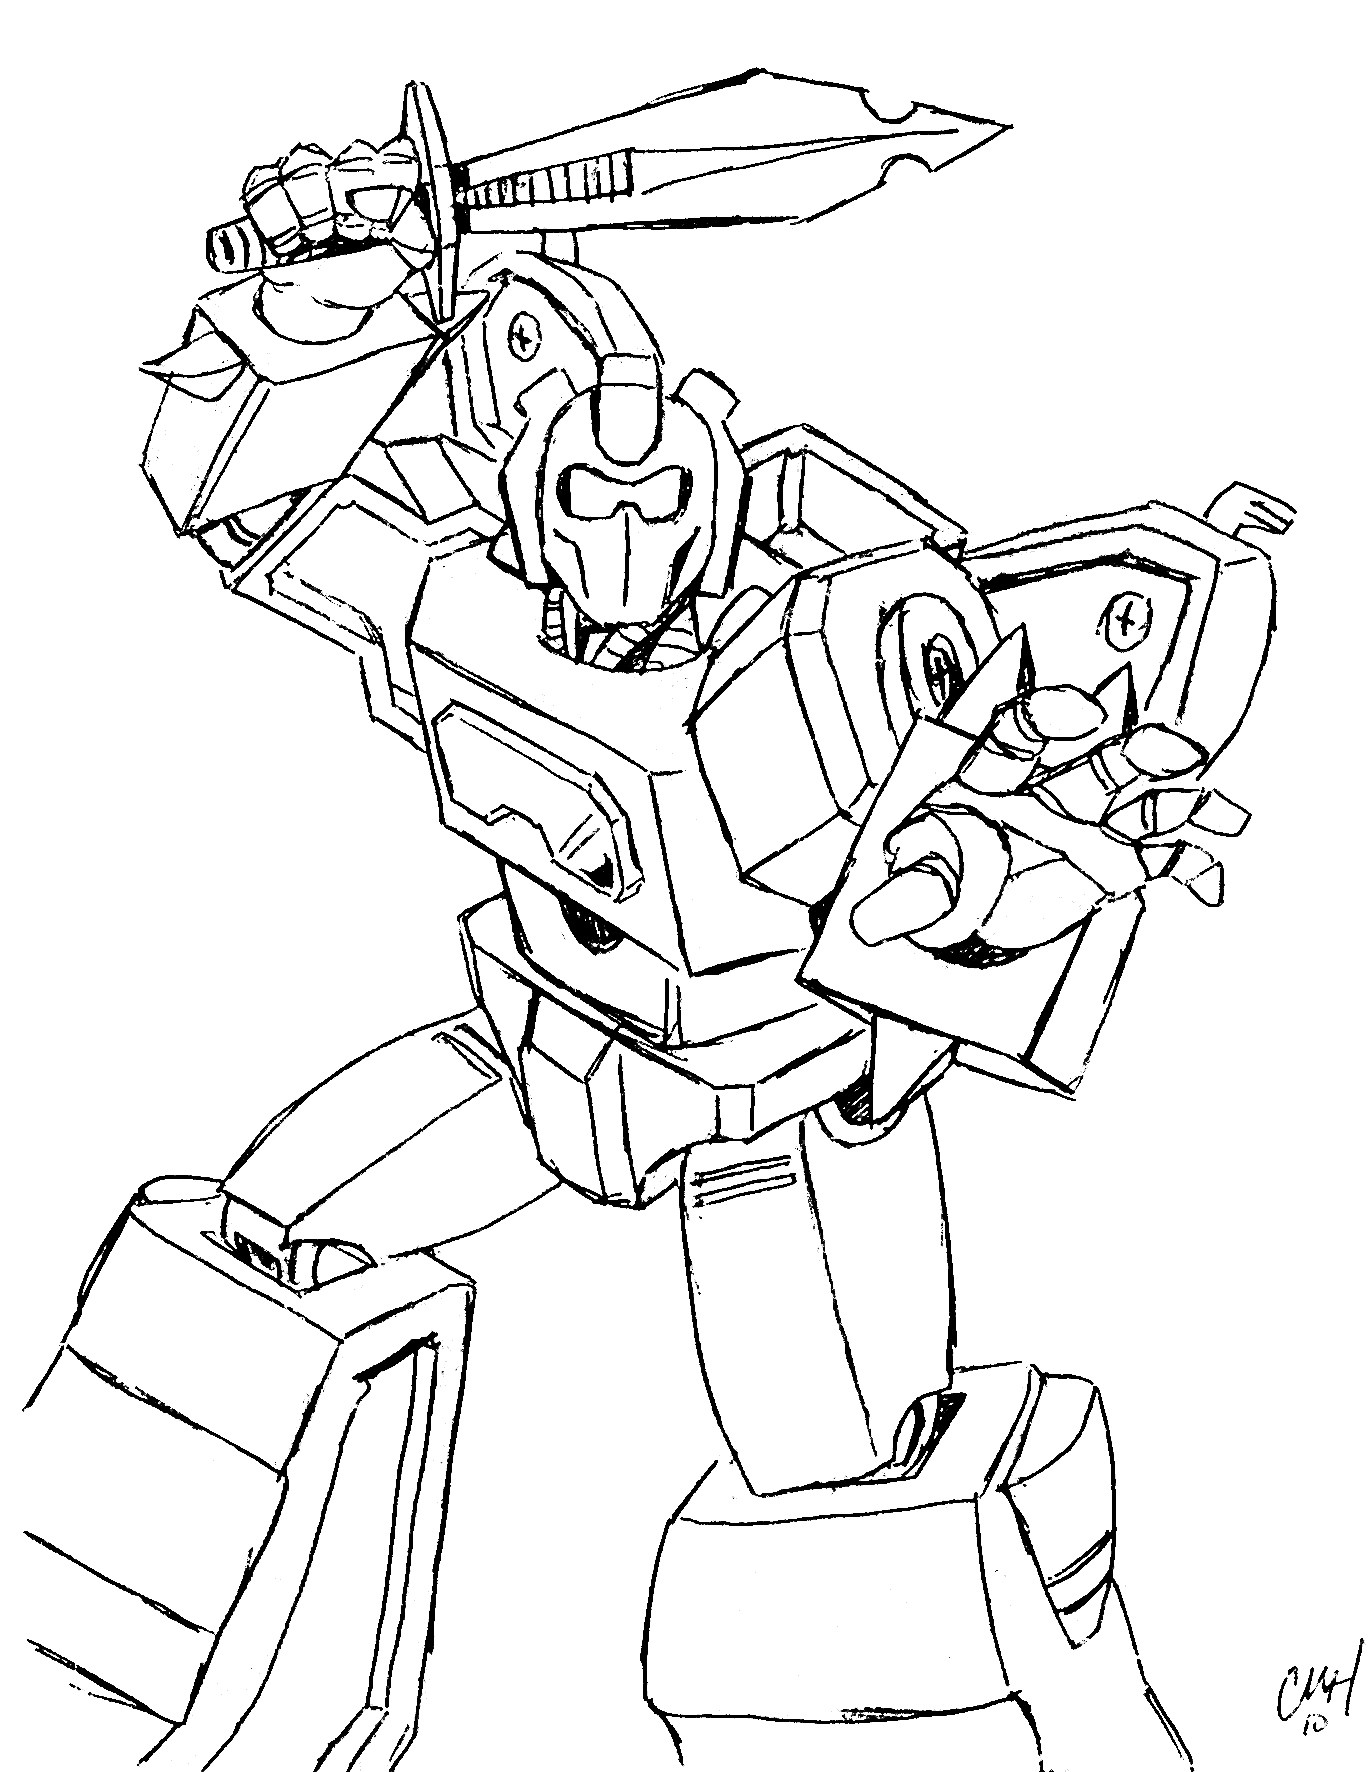 Download Free Printable Transformers Coloring Pages For Kids